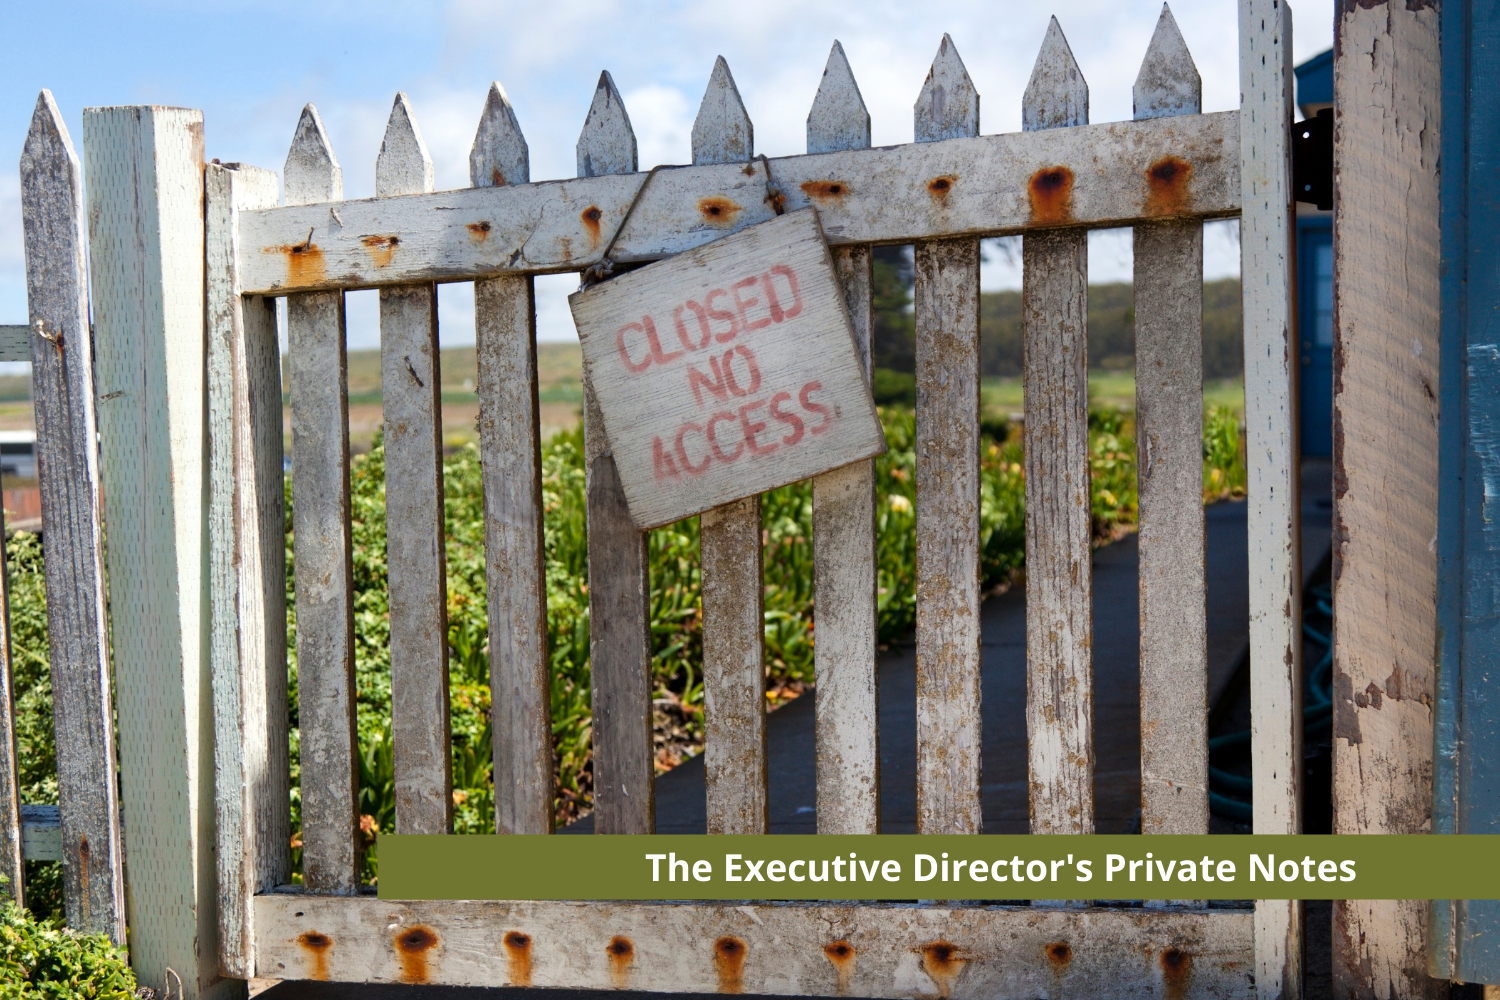 The Executive Director's Private Notes